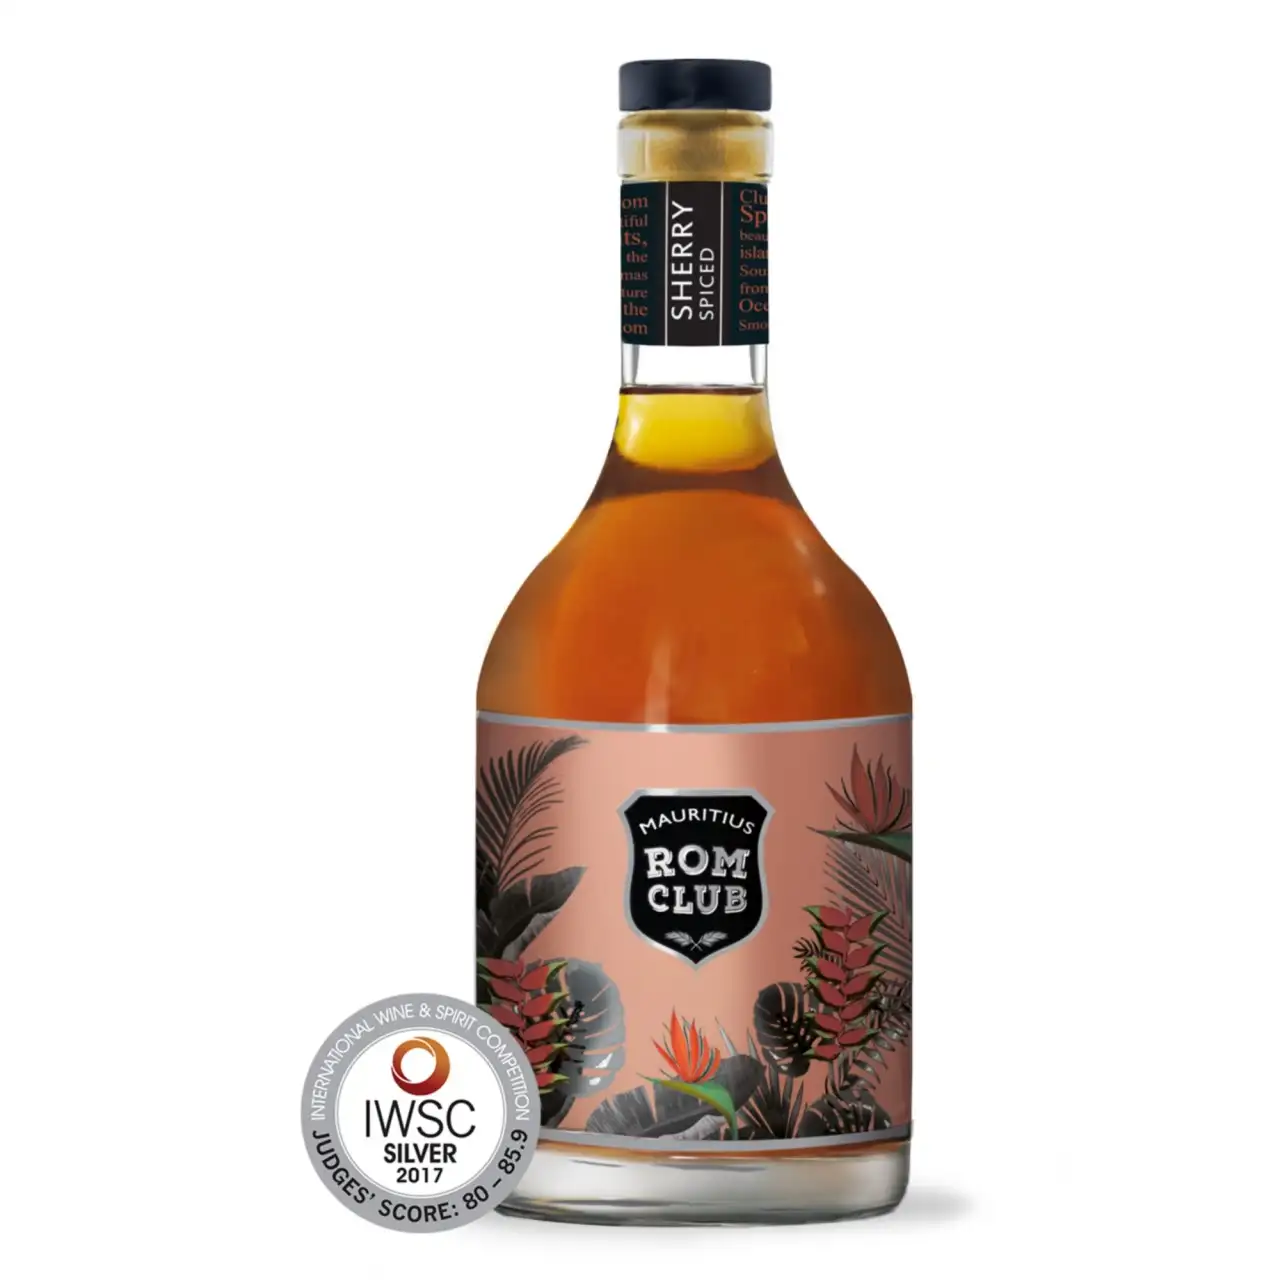 Image of the front of the bottle of the rum Mauritius Rom Club Sherry Spiced